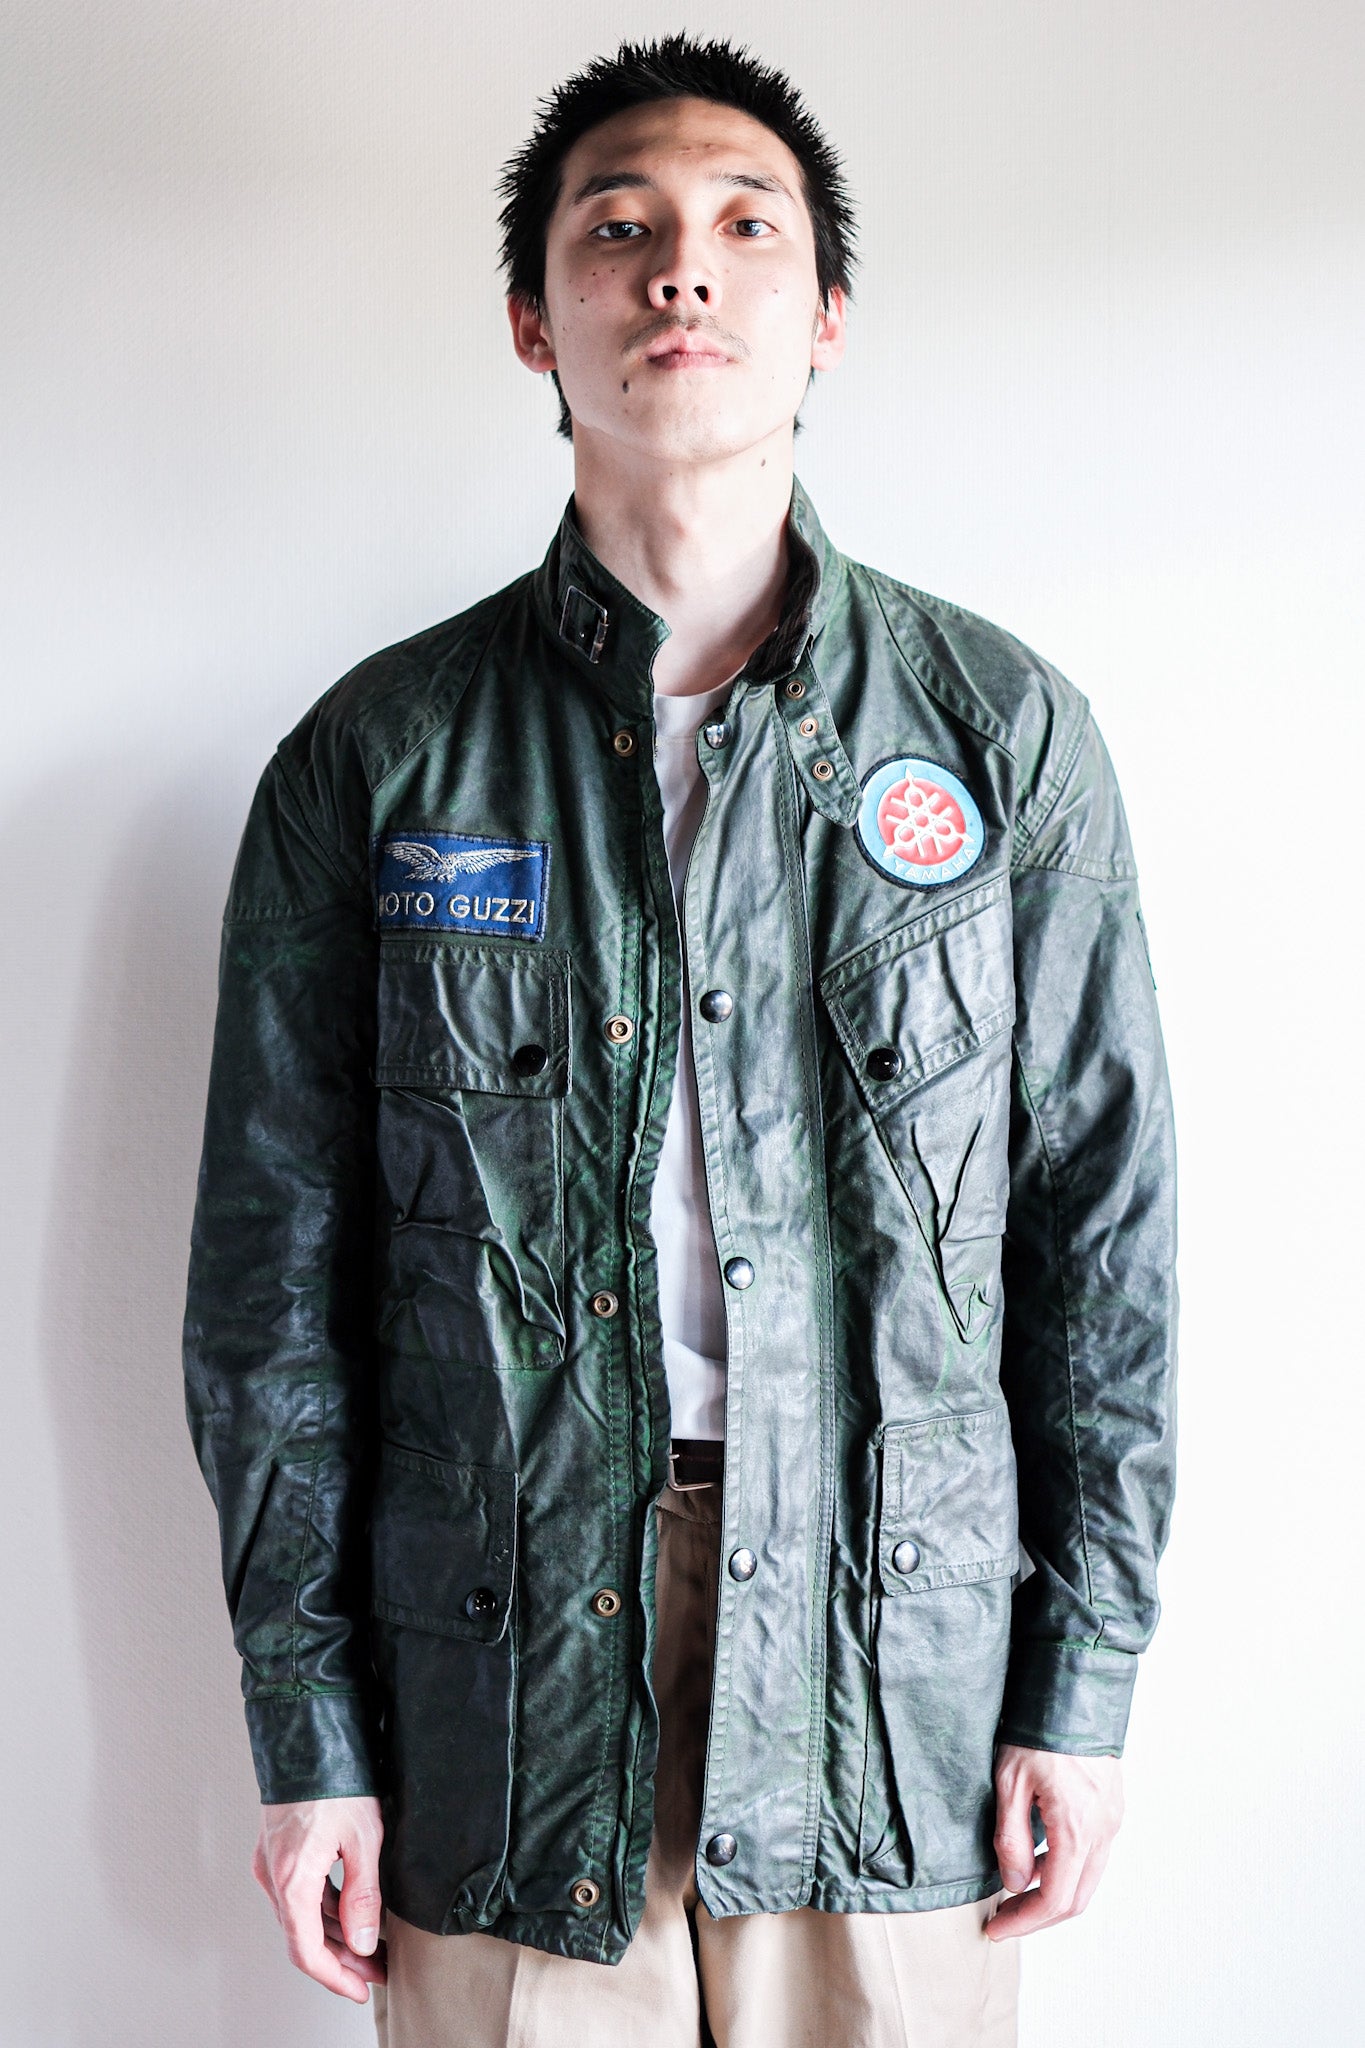 【~60's】Vintage Belstaff Green Waxed Jacket With Patches Size.36 “TRIALMASTER"